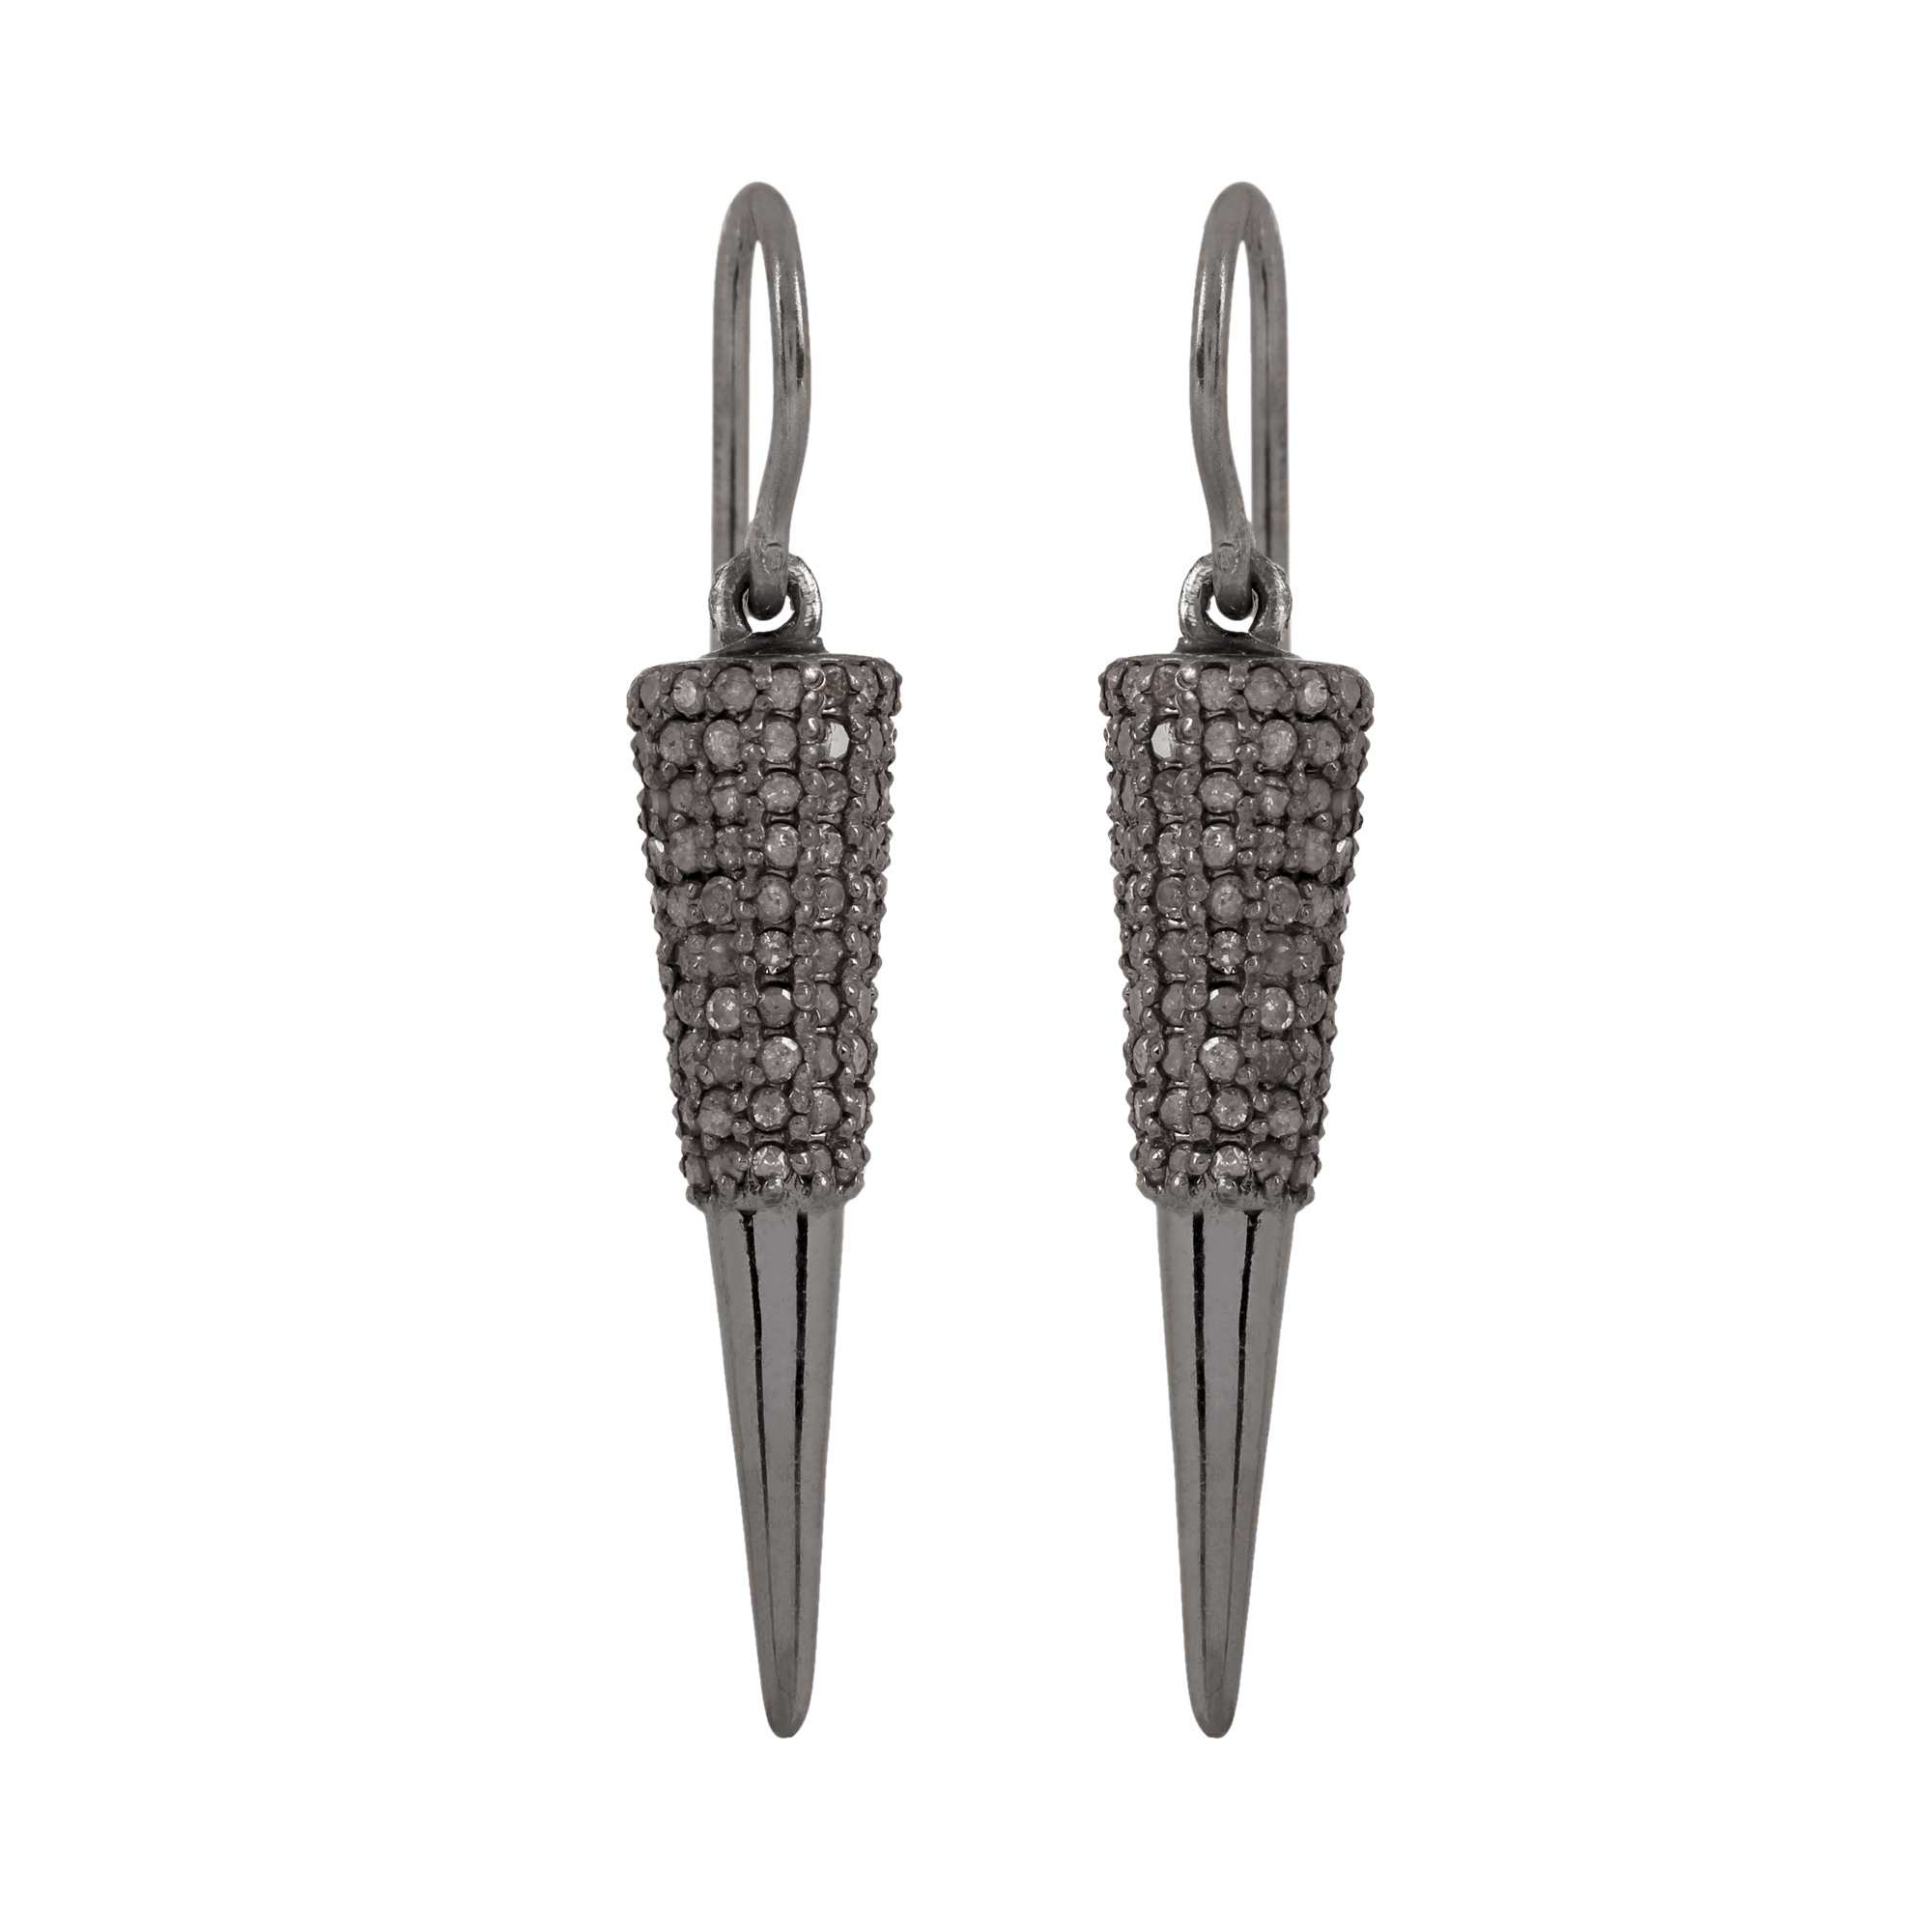 Hook earrings adorned with 2.60ct natural diamond 925 sterling silver jewelry